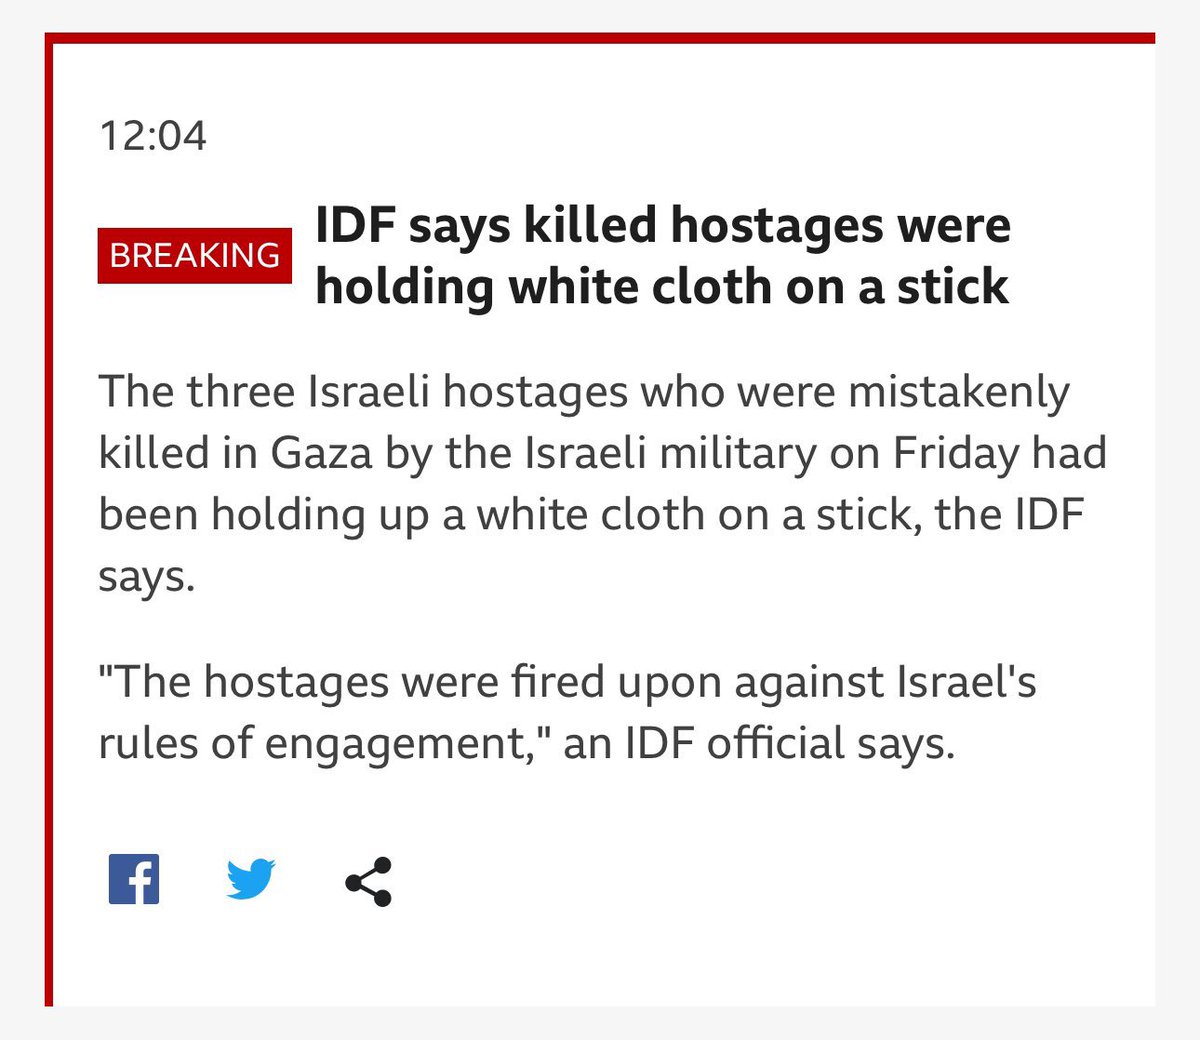 This is completely fucked. The IDF is currently acting with no sense of proper morality in Gaza and, considering Israel is currently controlled by the far right, we shouldn’t be surprised.